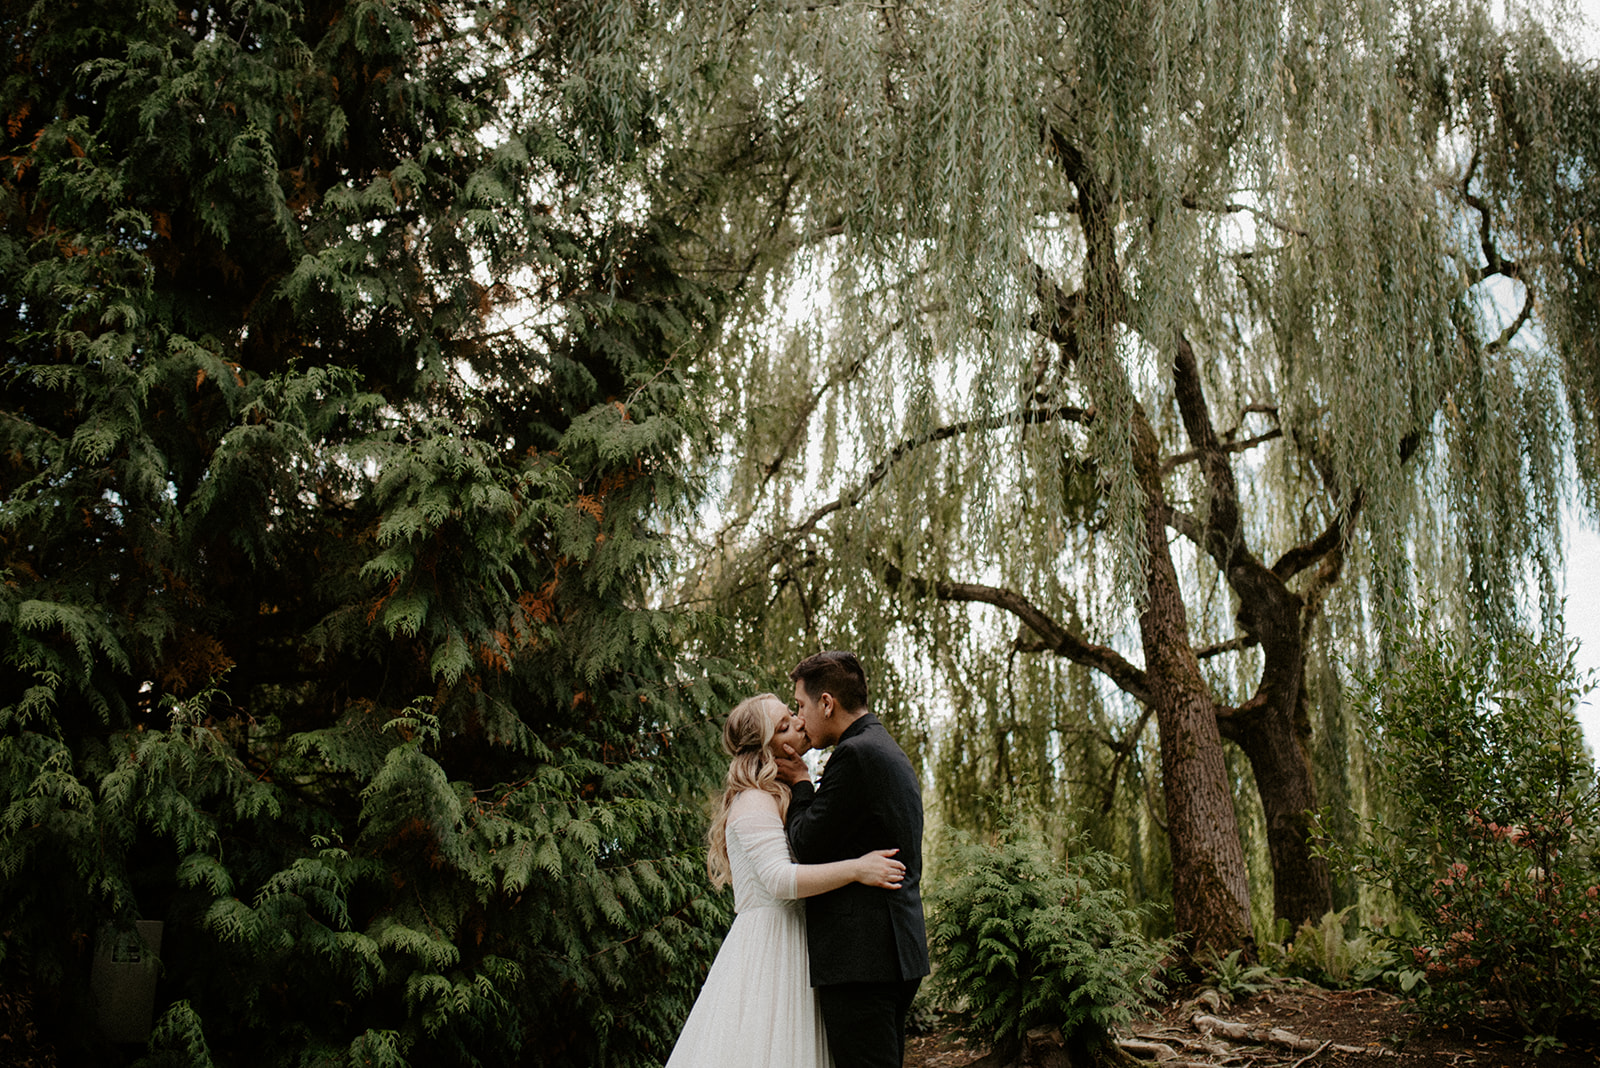 A couple sharing a kiss under the lush branches of a weeping willow tree, with the woman in a white dress and the man in a dark suit.